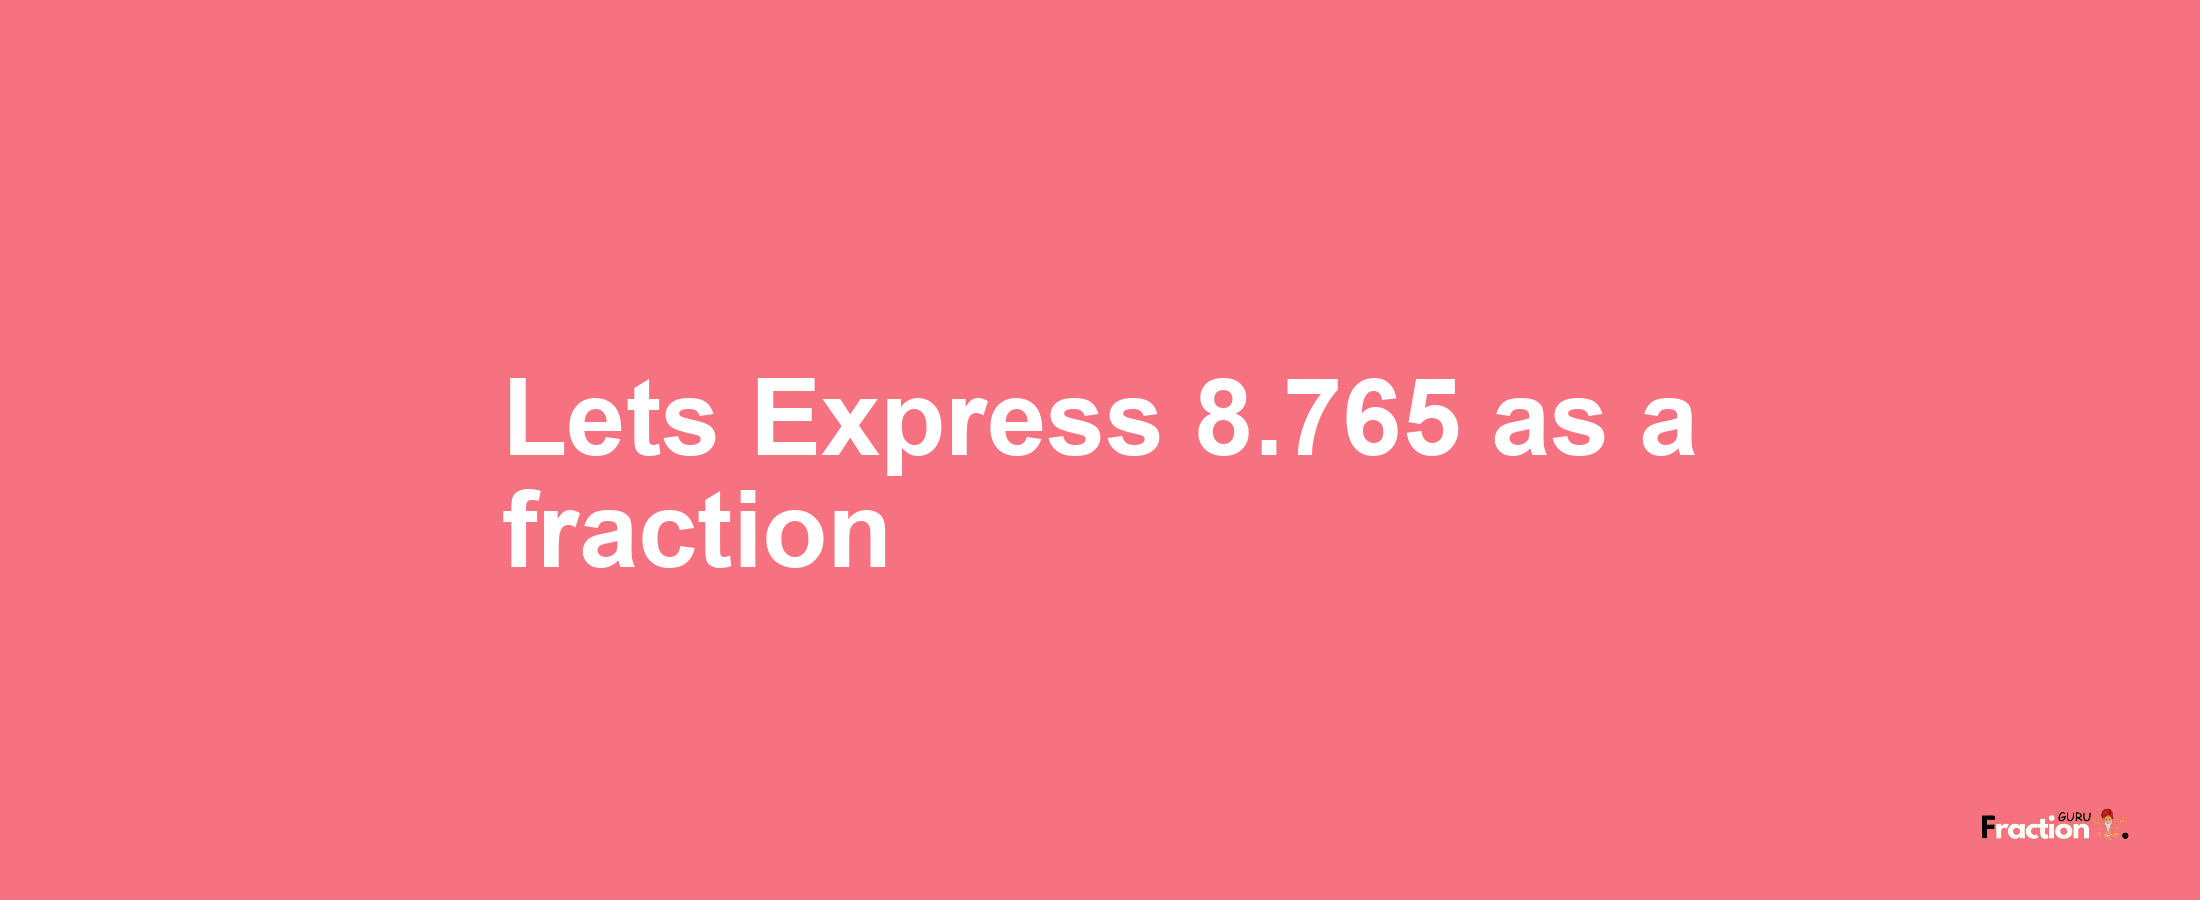 Lets Express 8.765 as afraction